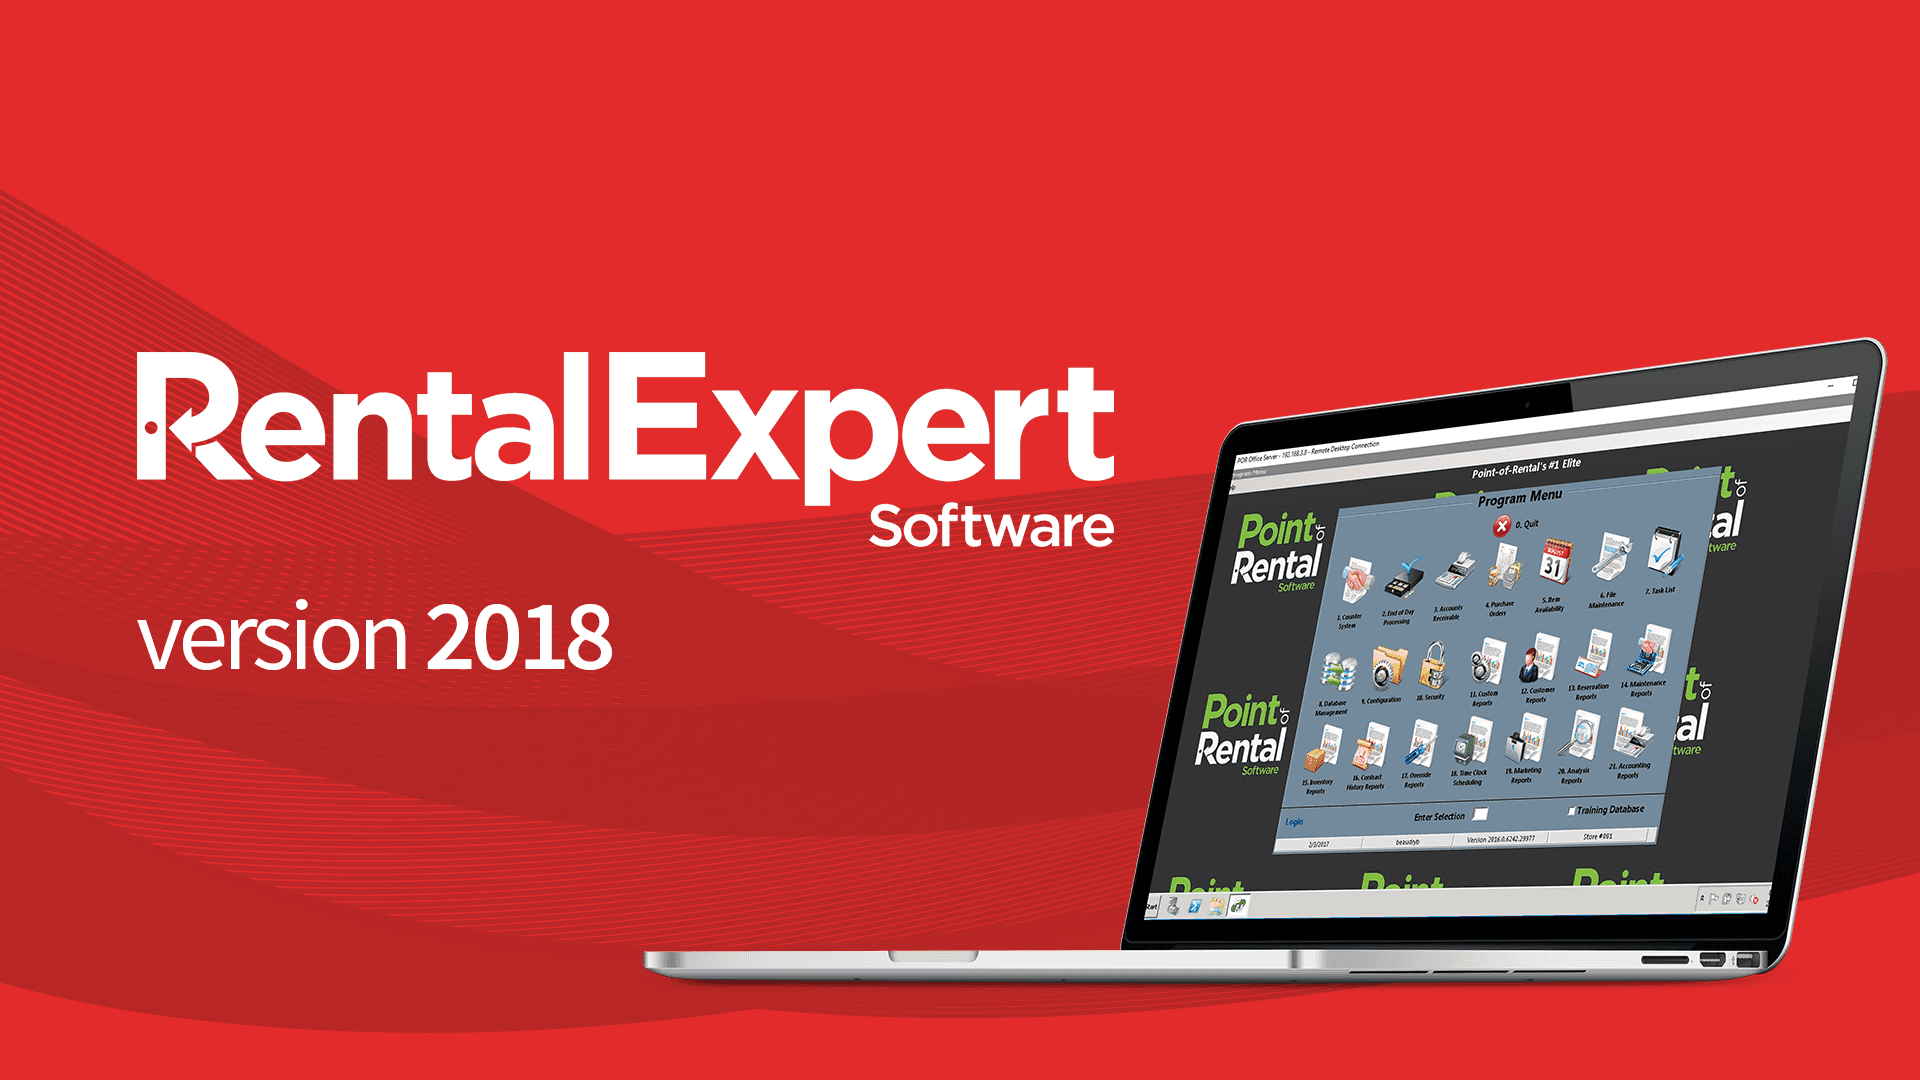 Point of Rental Expert v2018 is available!